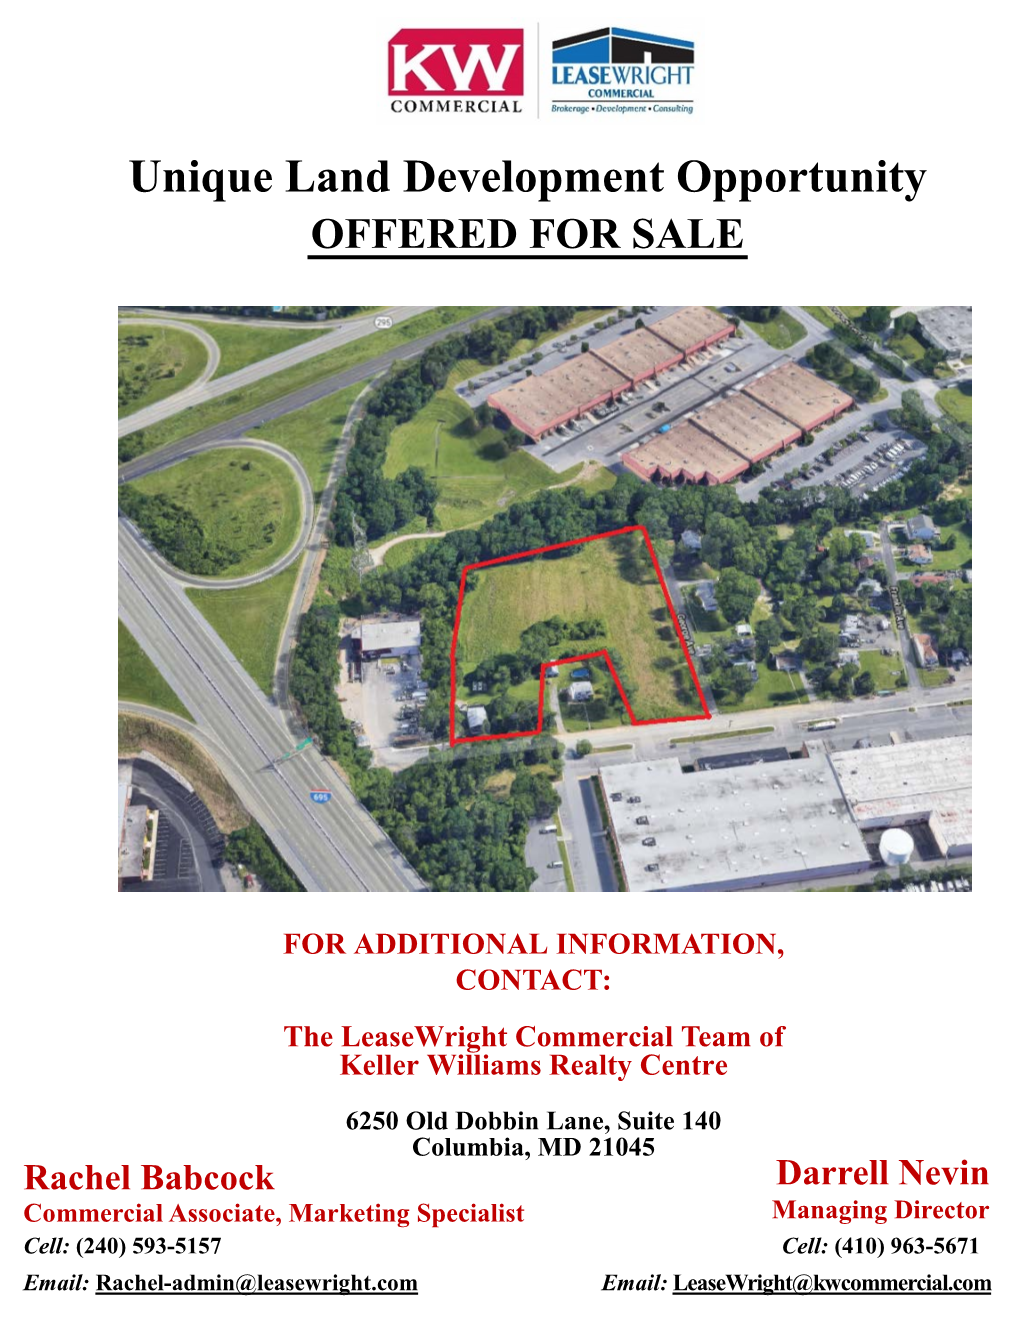 Unique Land Development Opportunity OFFERED for SALE